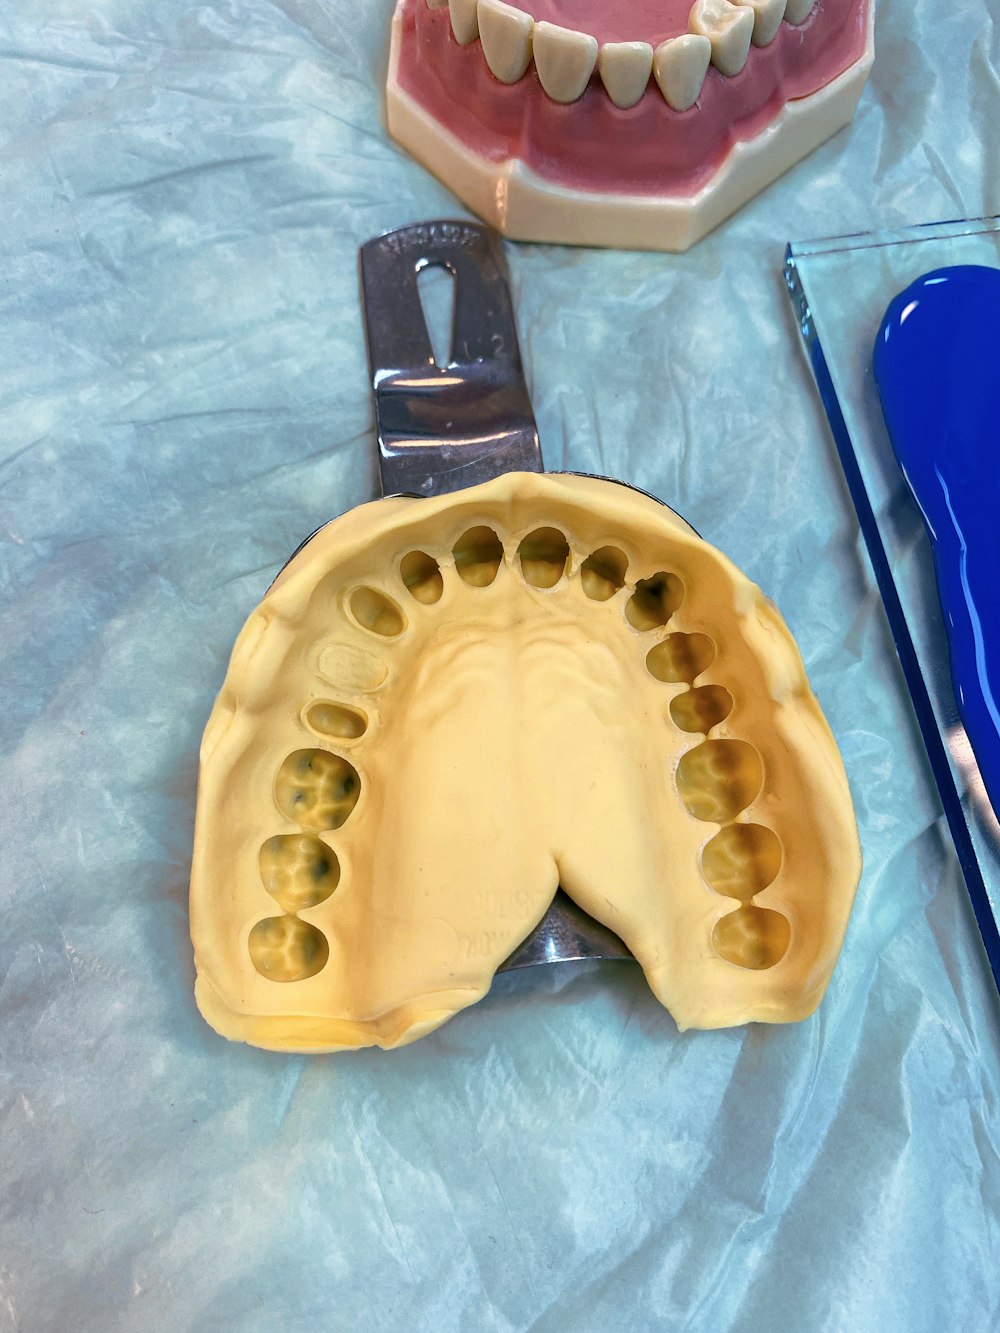 a dental model of a mouth and a dental tool